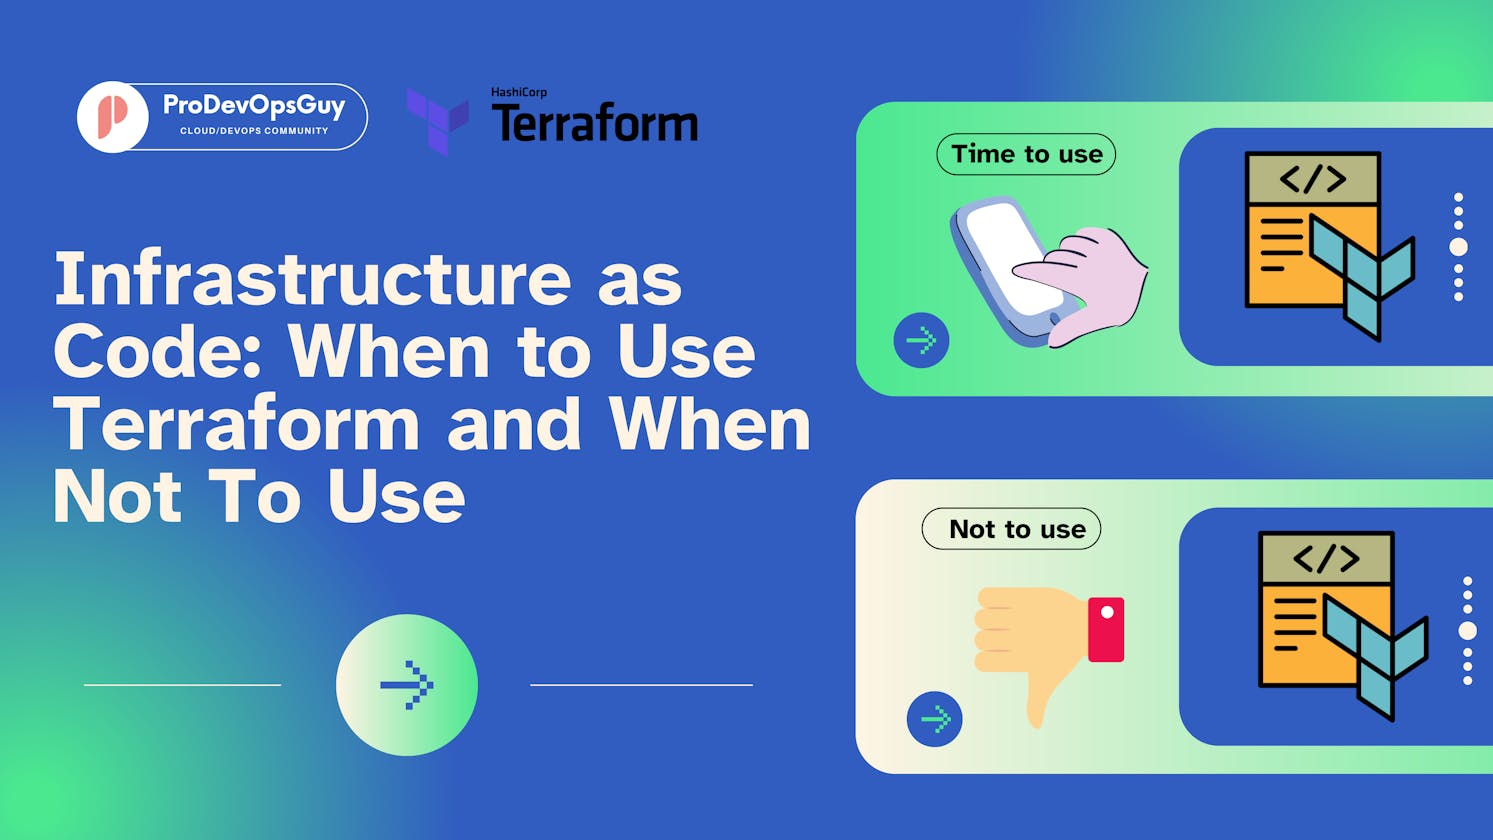 Infrastructure as Code: When to Use Terraform and When Not To Use